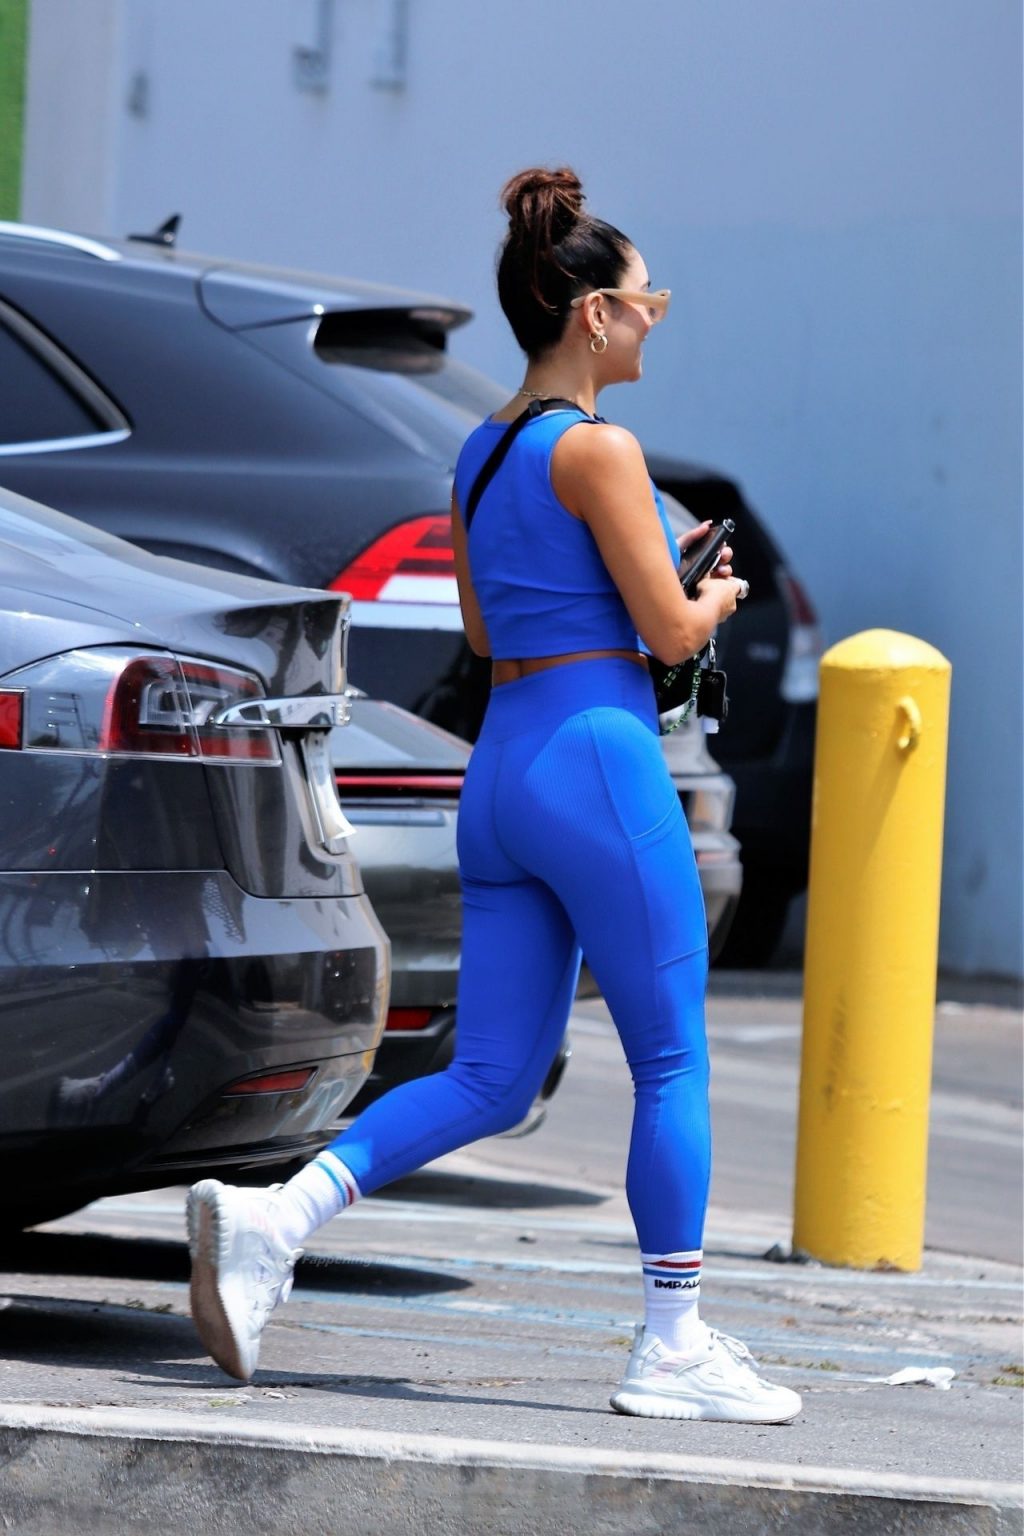 Vanessa Hudgens &amp; GG Magree Team Up For a Morning Workout at Dogpound (151 Photos)